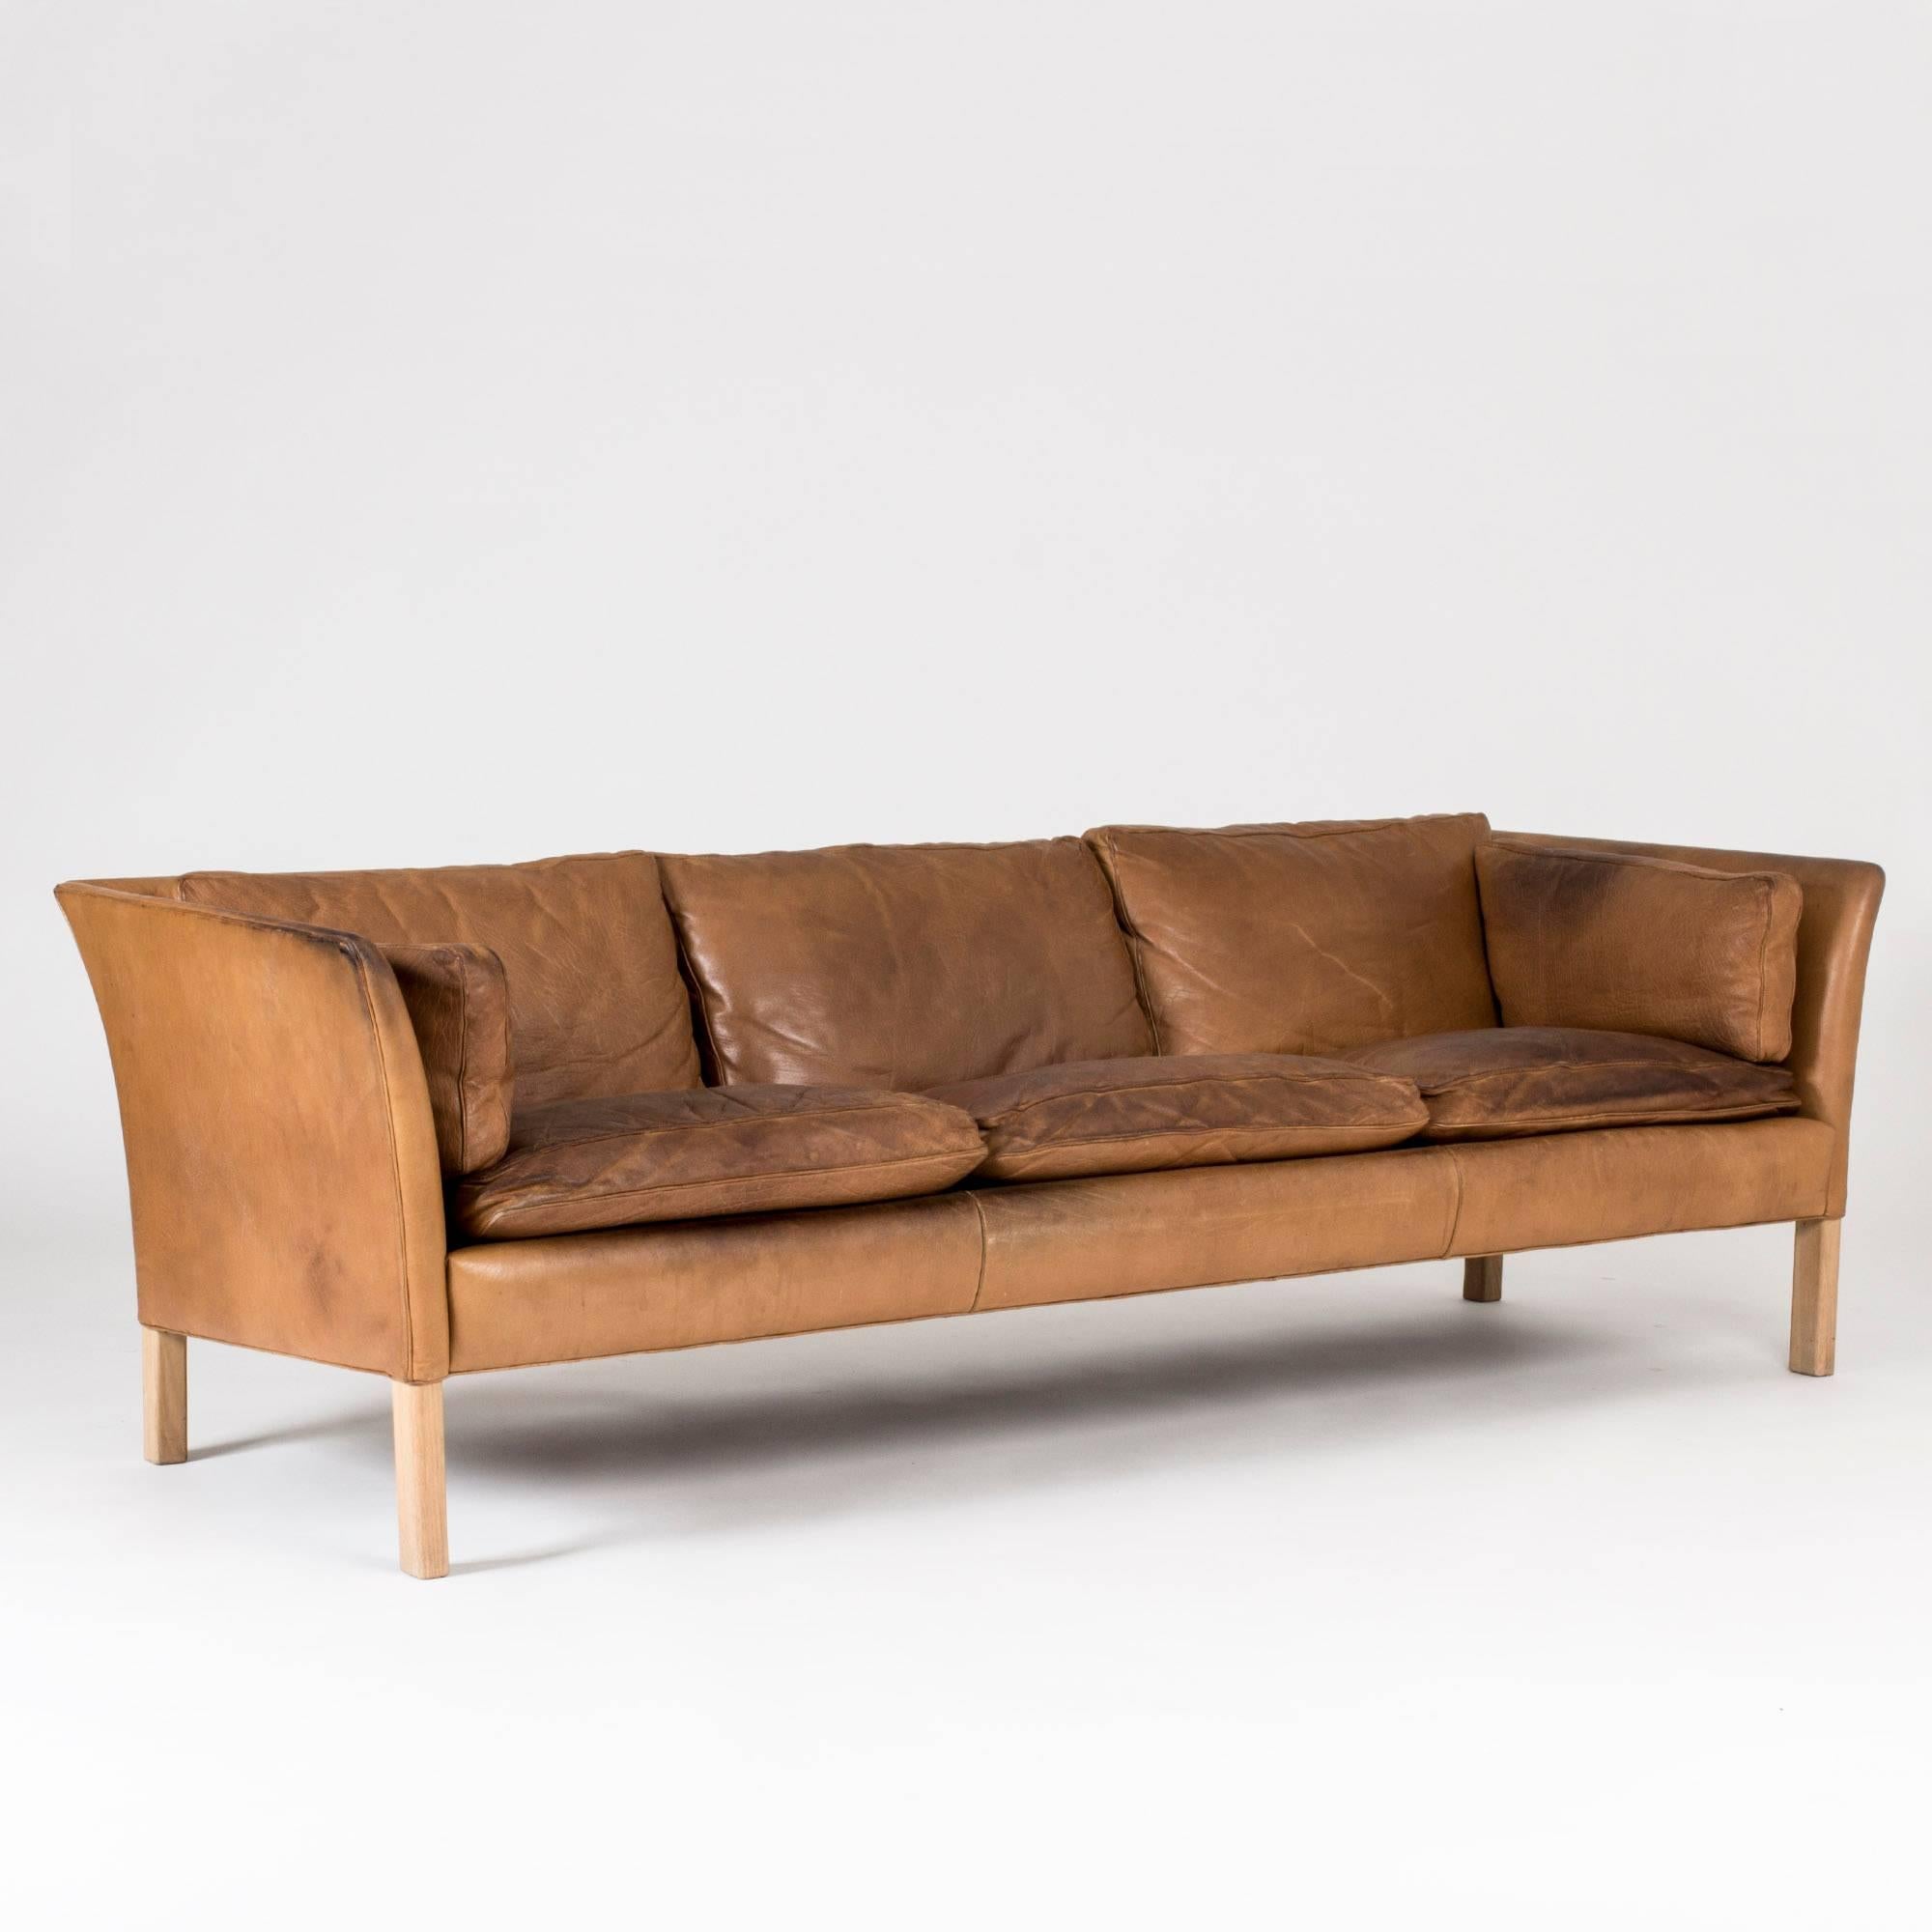 “Cromwell” three-seat sofa in cognac colored leather by Arne Norell. Timeless design with a lightness and elegantly curved armrests.